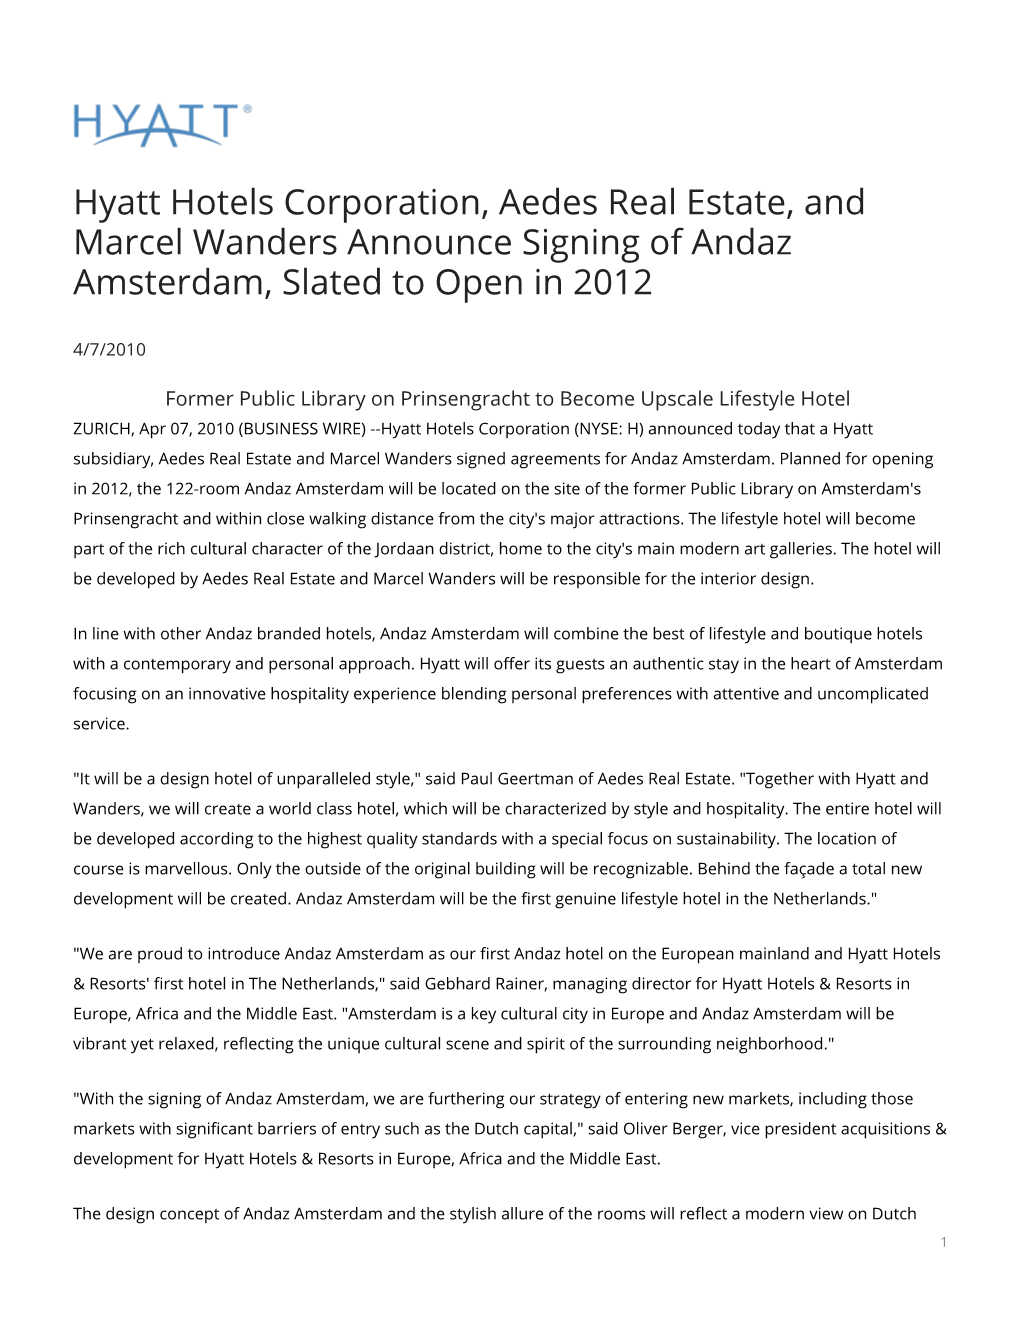 Hyatt Hotels Corporation, Aedes Real Estate, and Marcel Wanders Announce Signing of Andaz Amsterdam, Slated to Open in 2012